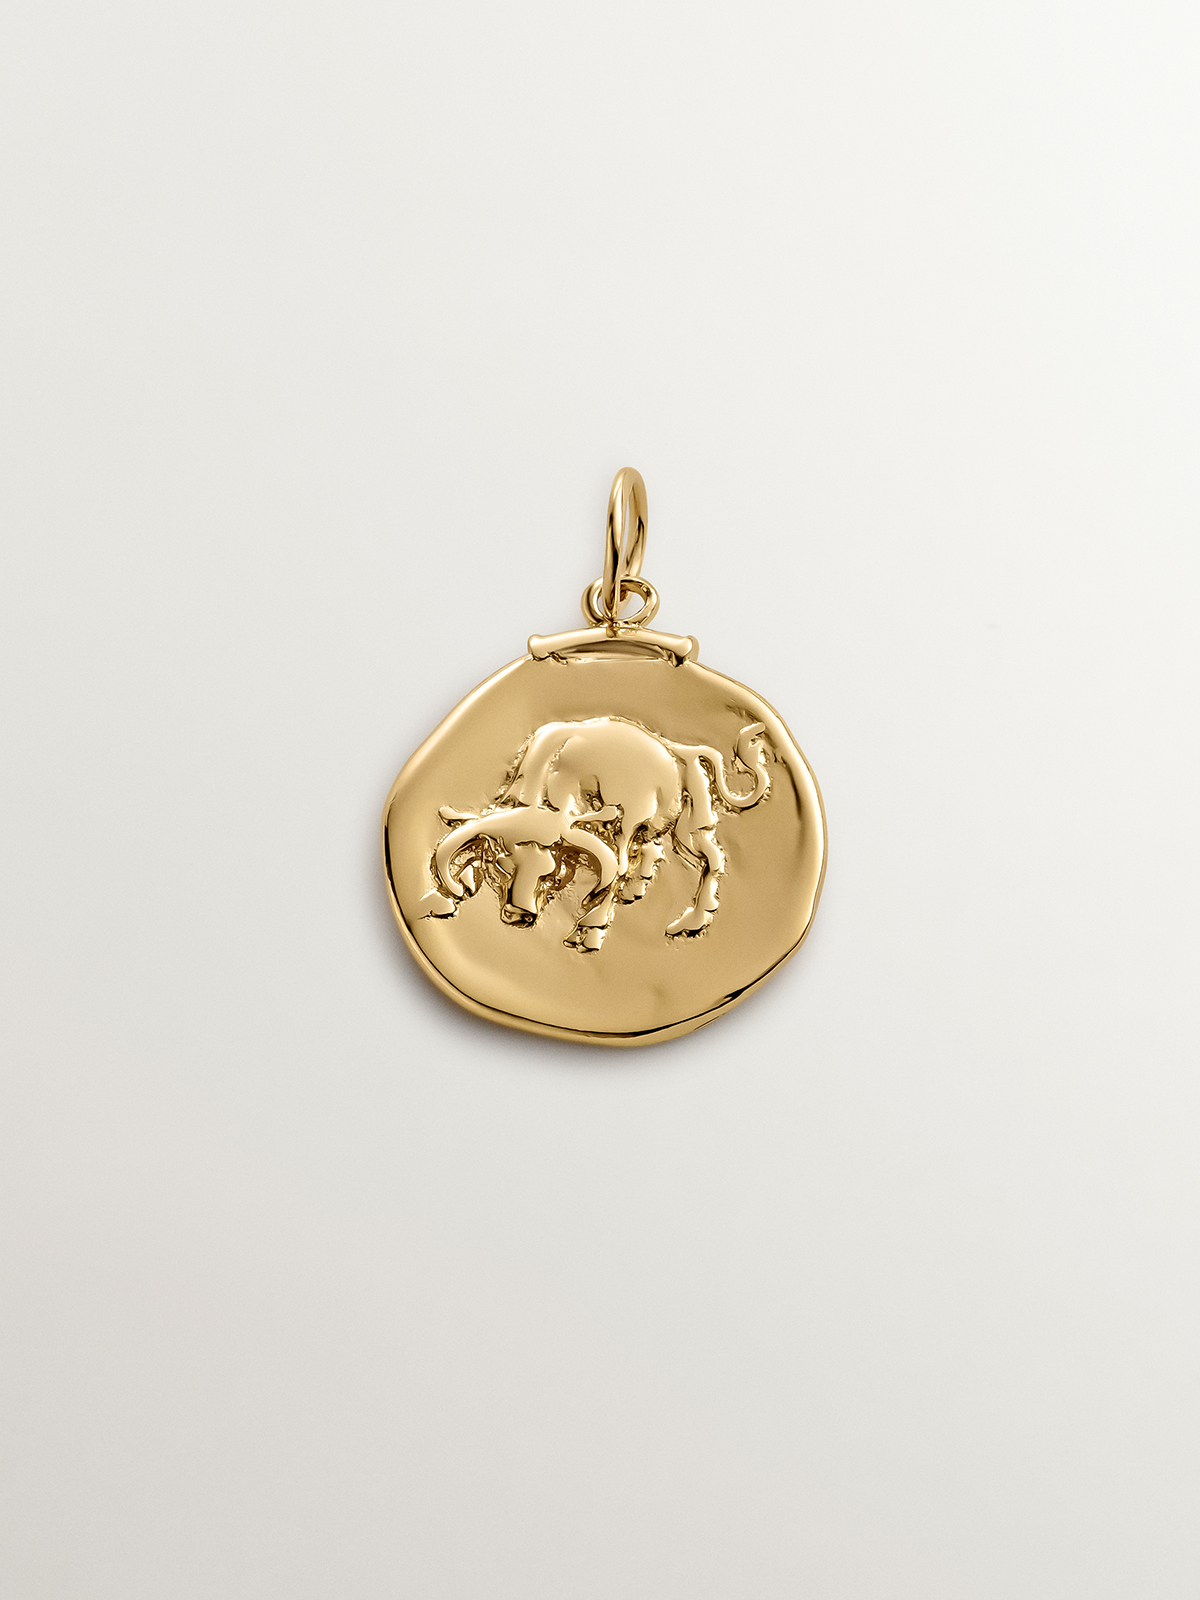 925 Silver Taurus Charm bathed in 18K yellow gold.